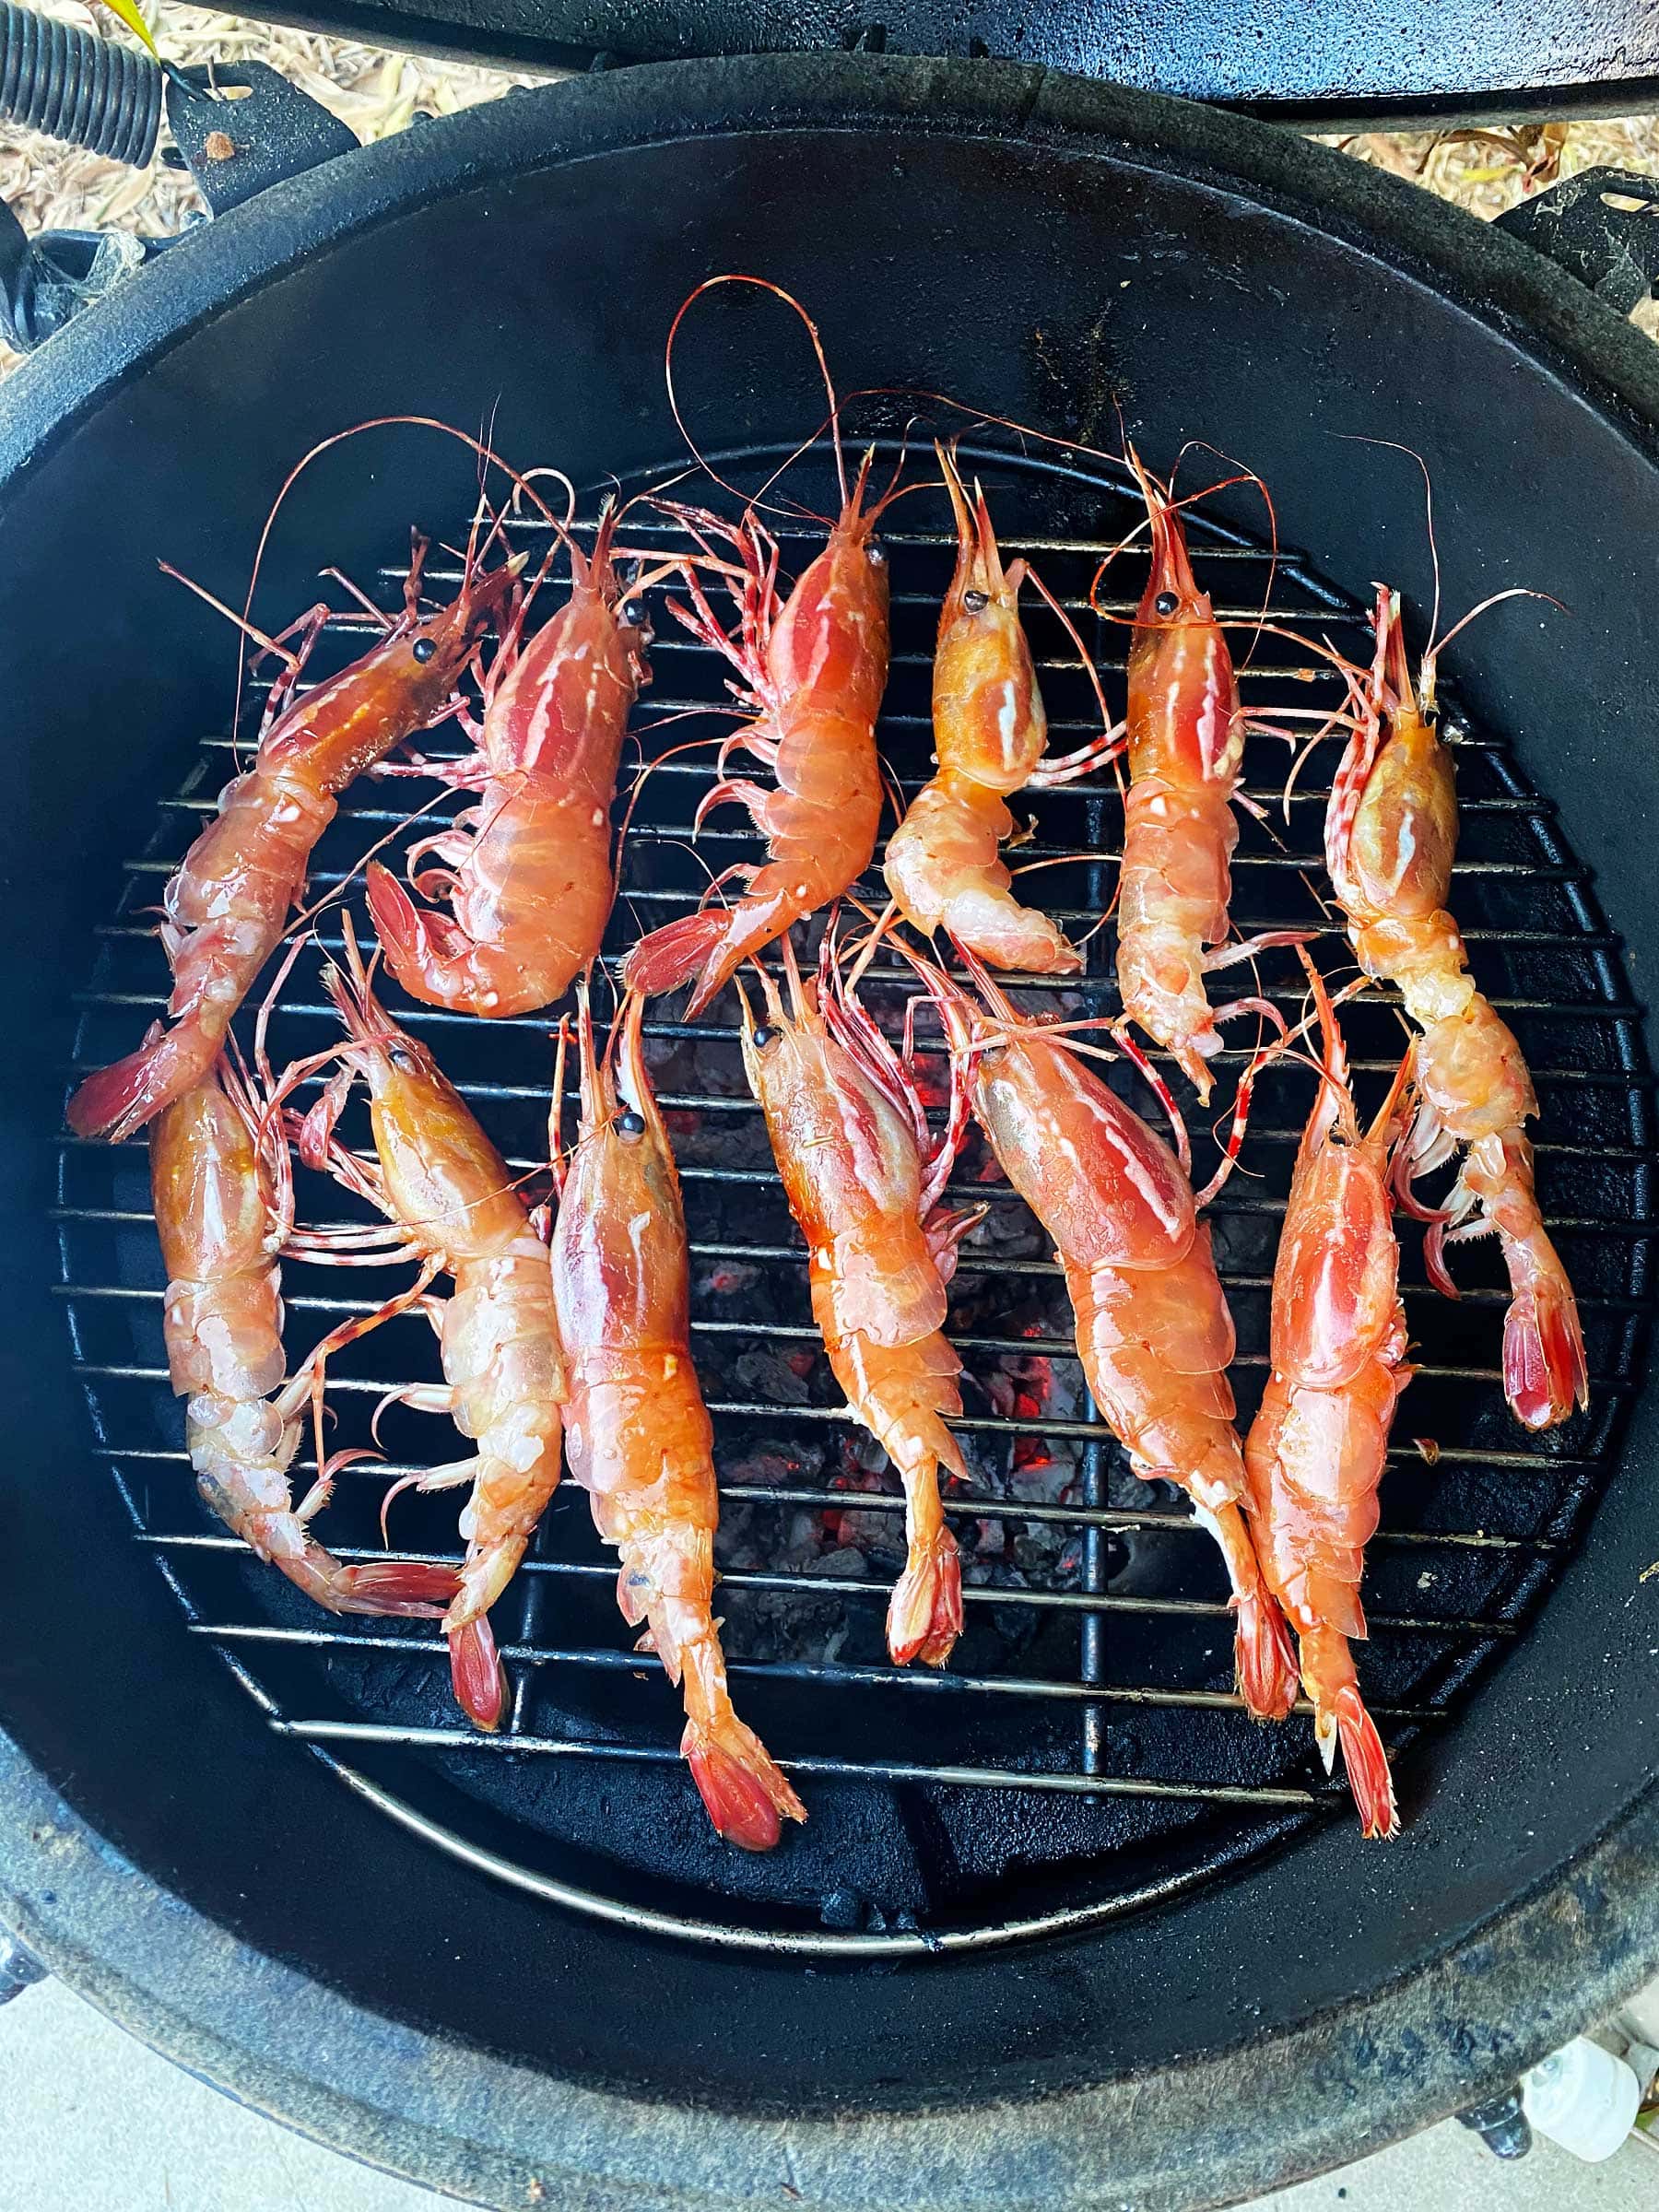 Grilled Spot Prawns with Garlic Herb Butter on the griller